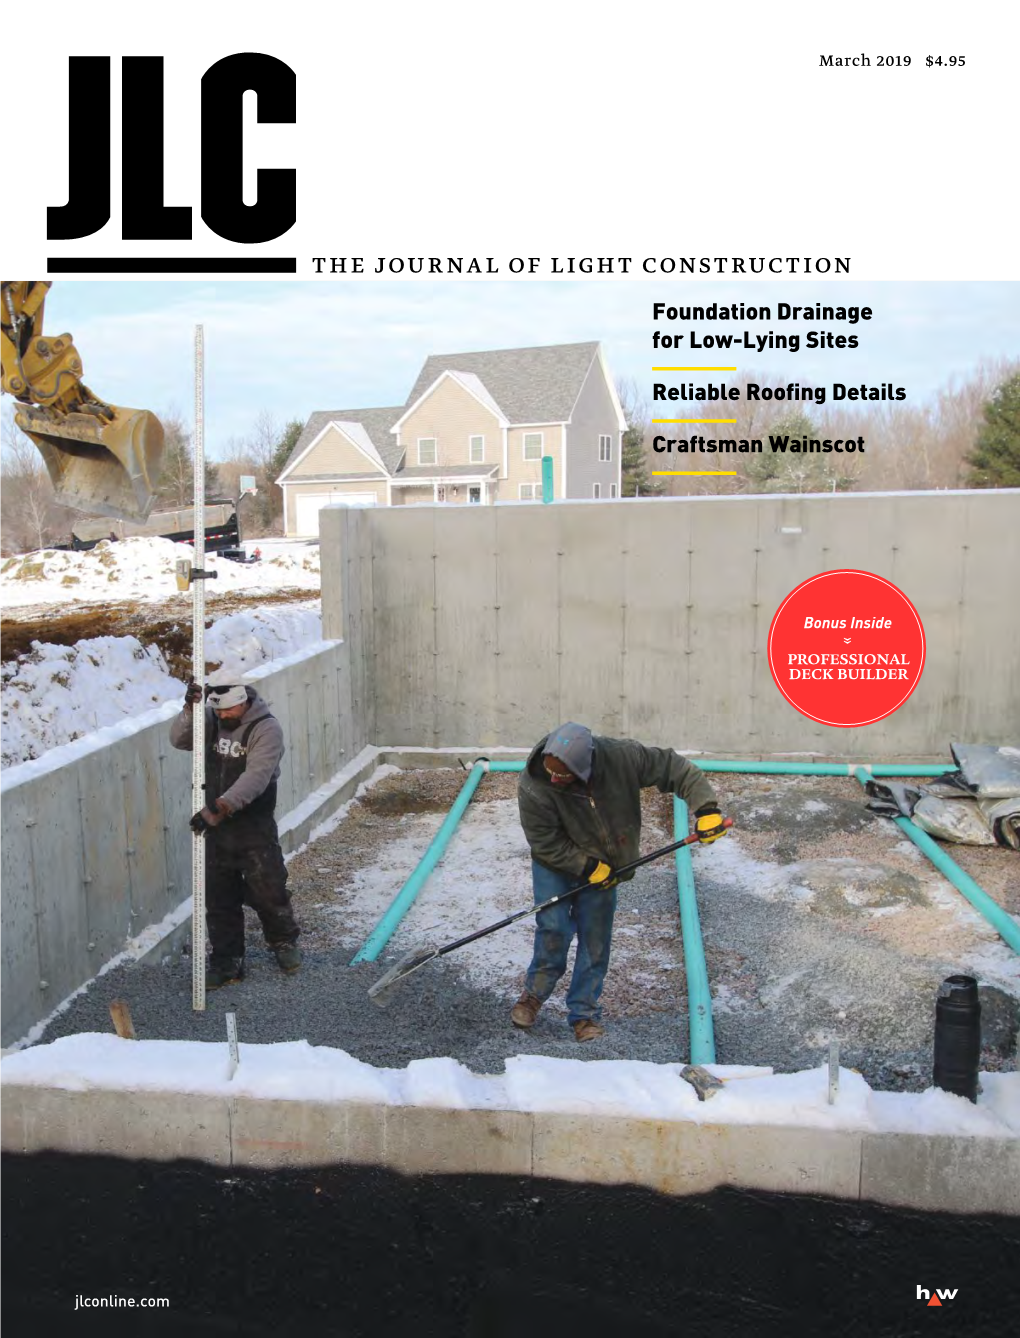 THE JOURNAL of LIGHT CONSTRUCTION Foundation Drainage for Low-Lying Sites